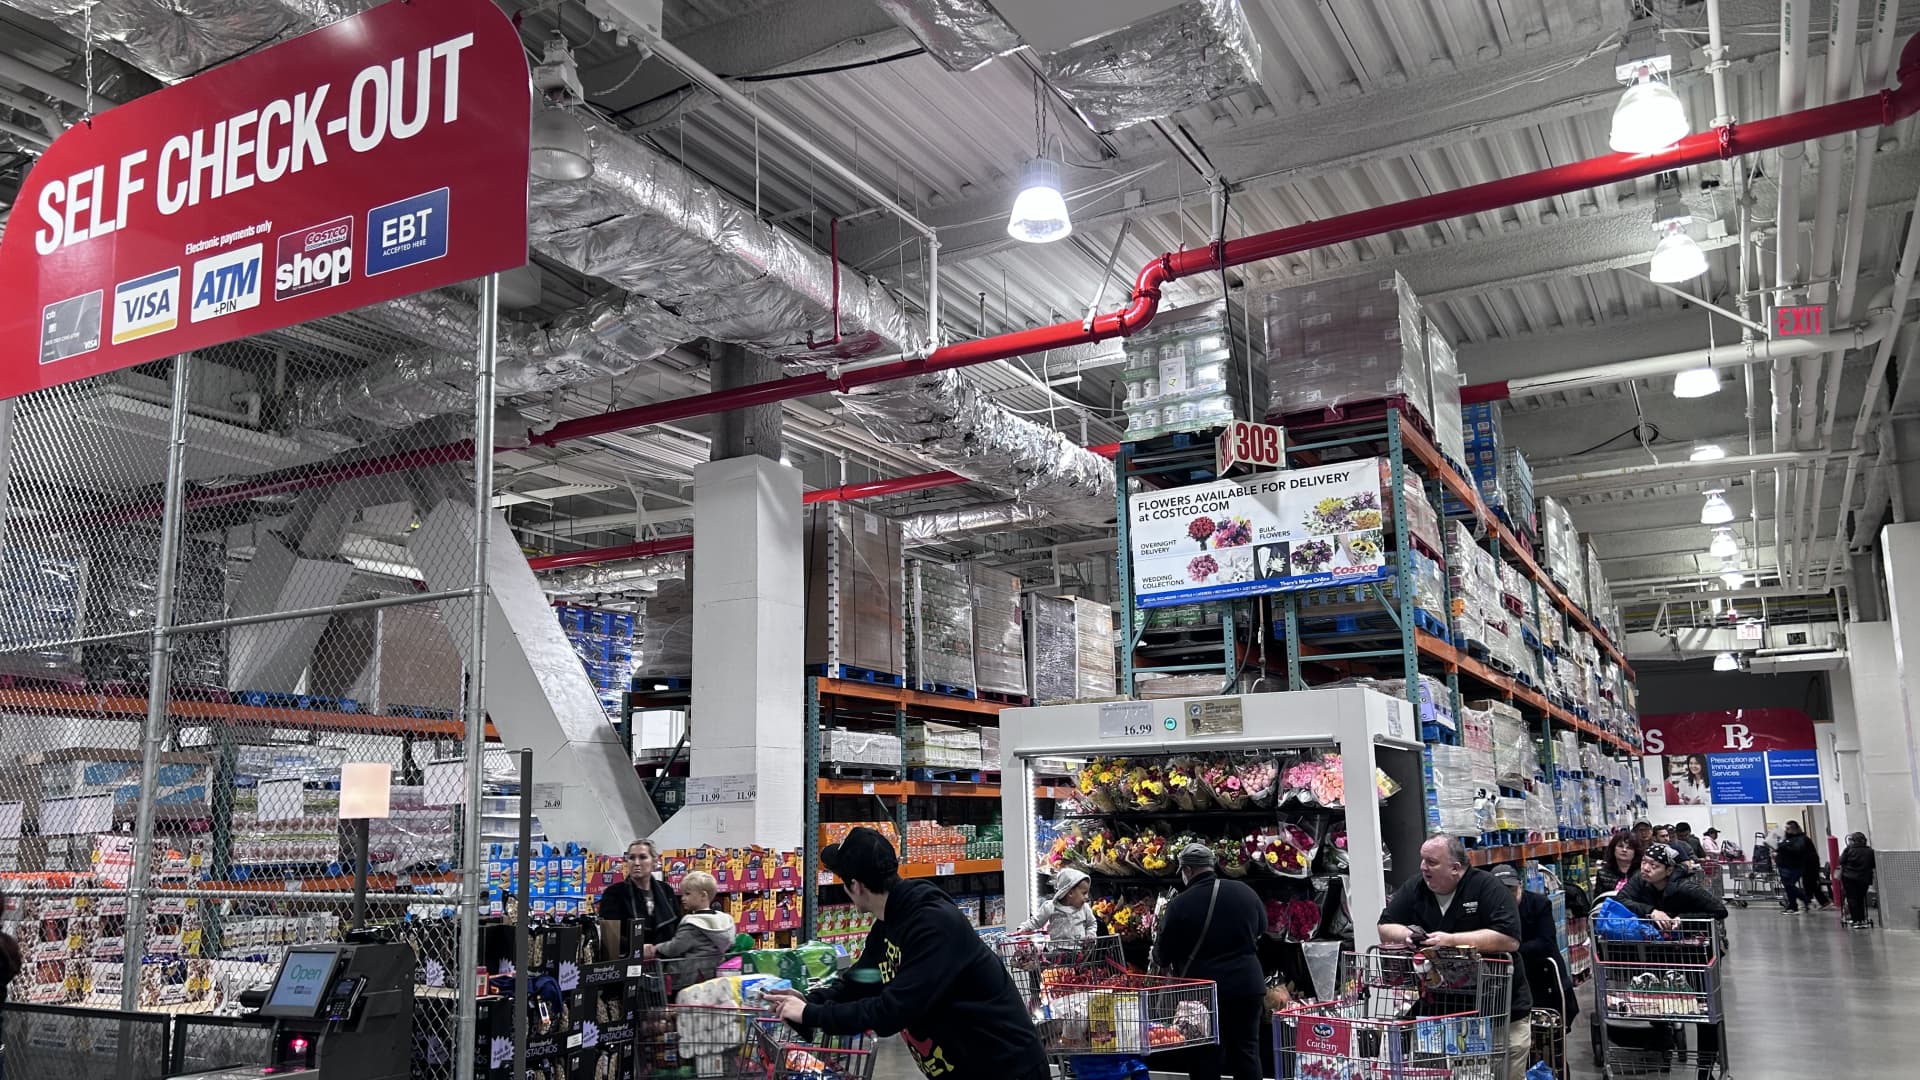 Costco shares dip despite earnings beat. There’s no cause for investor concern